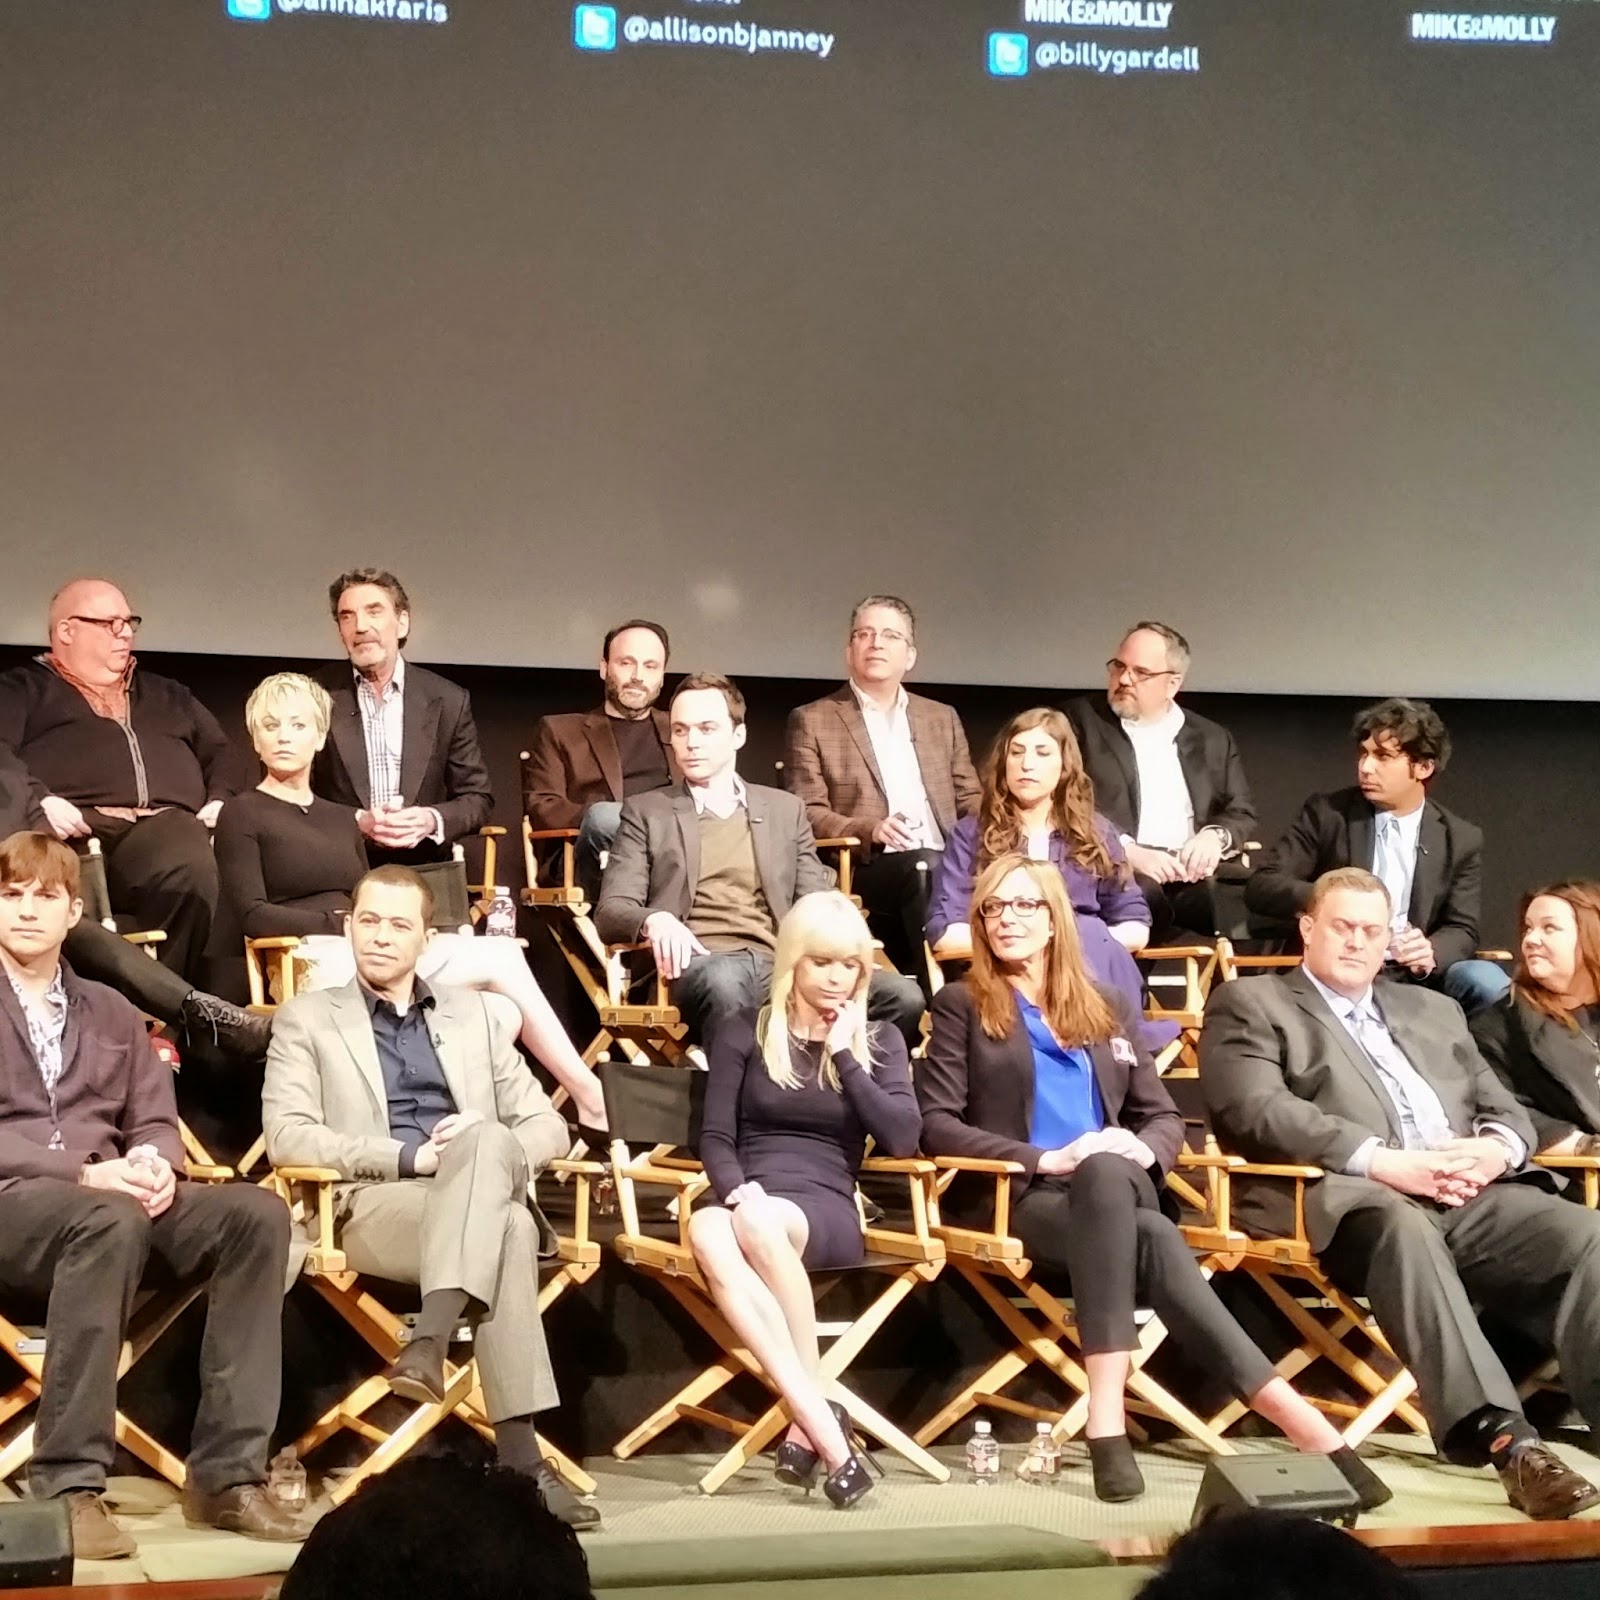 The cast and Crew of Warner Bros. shows